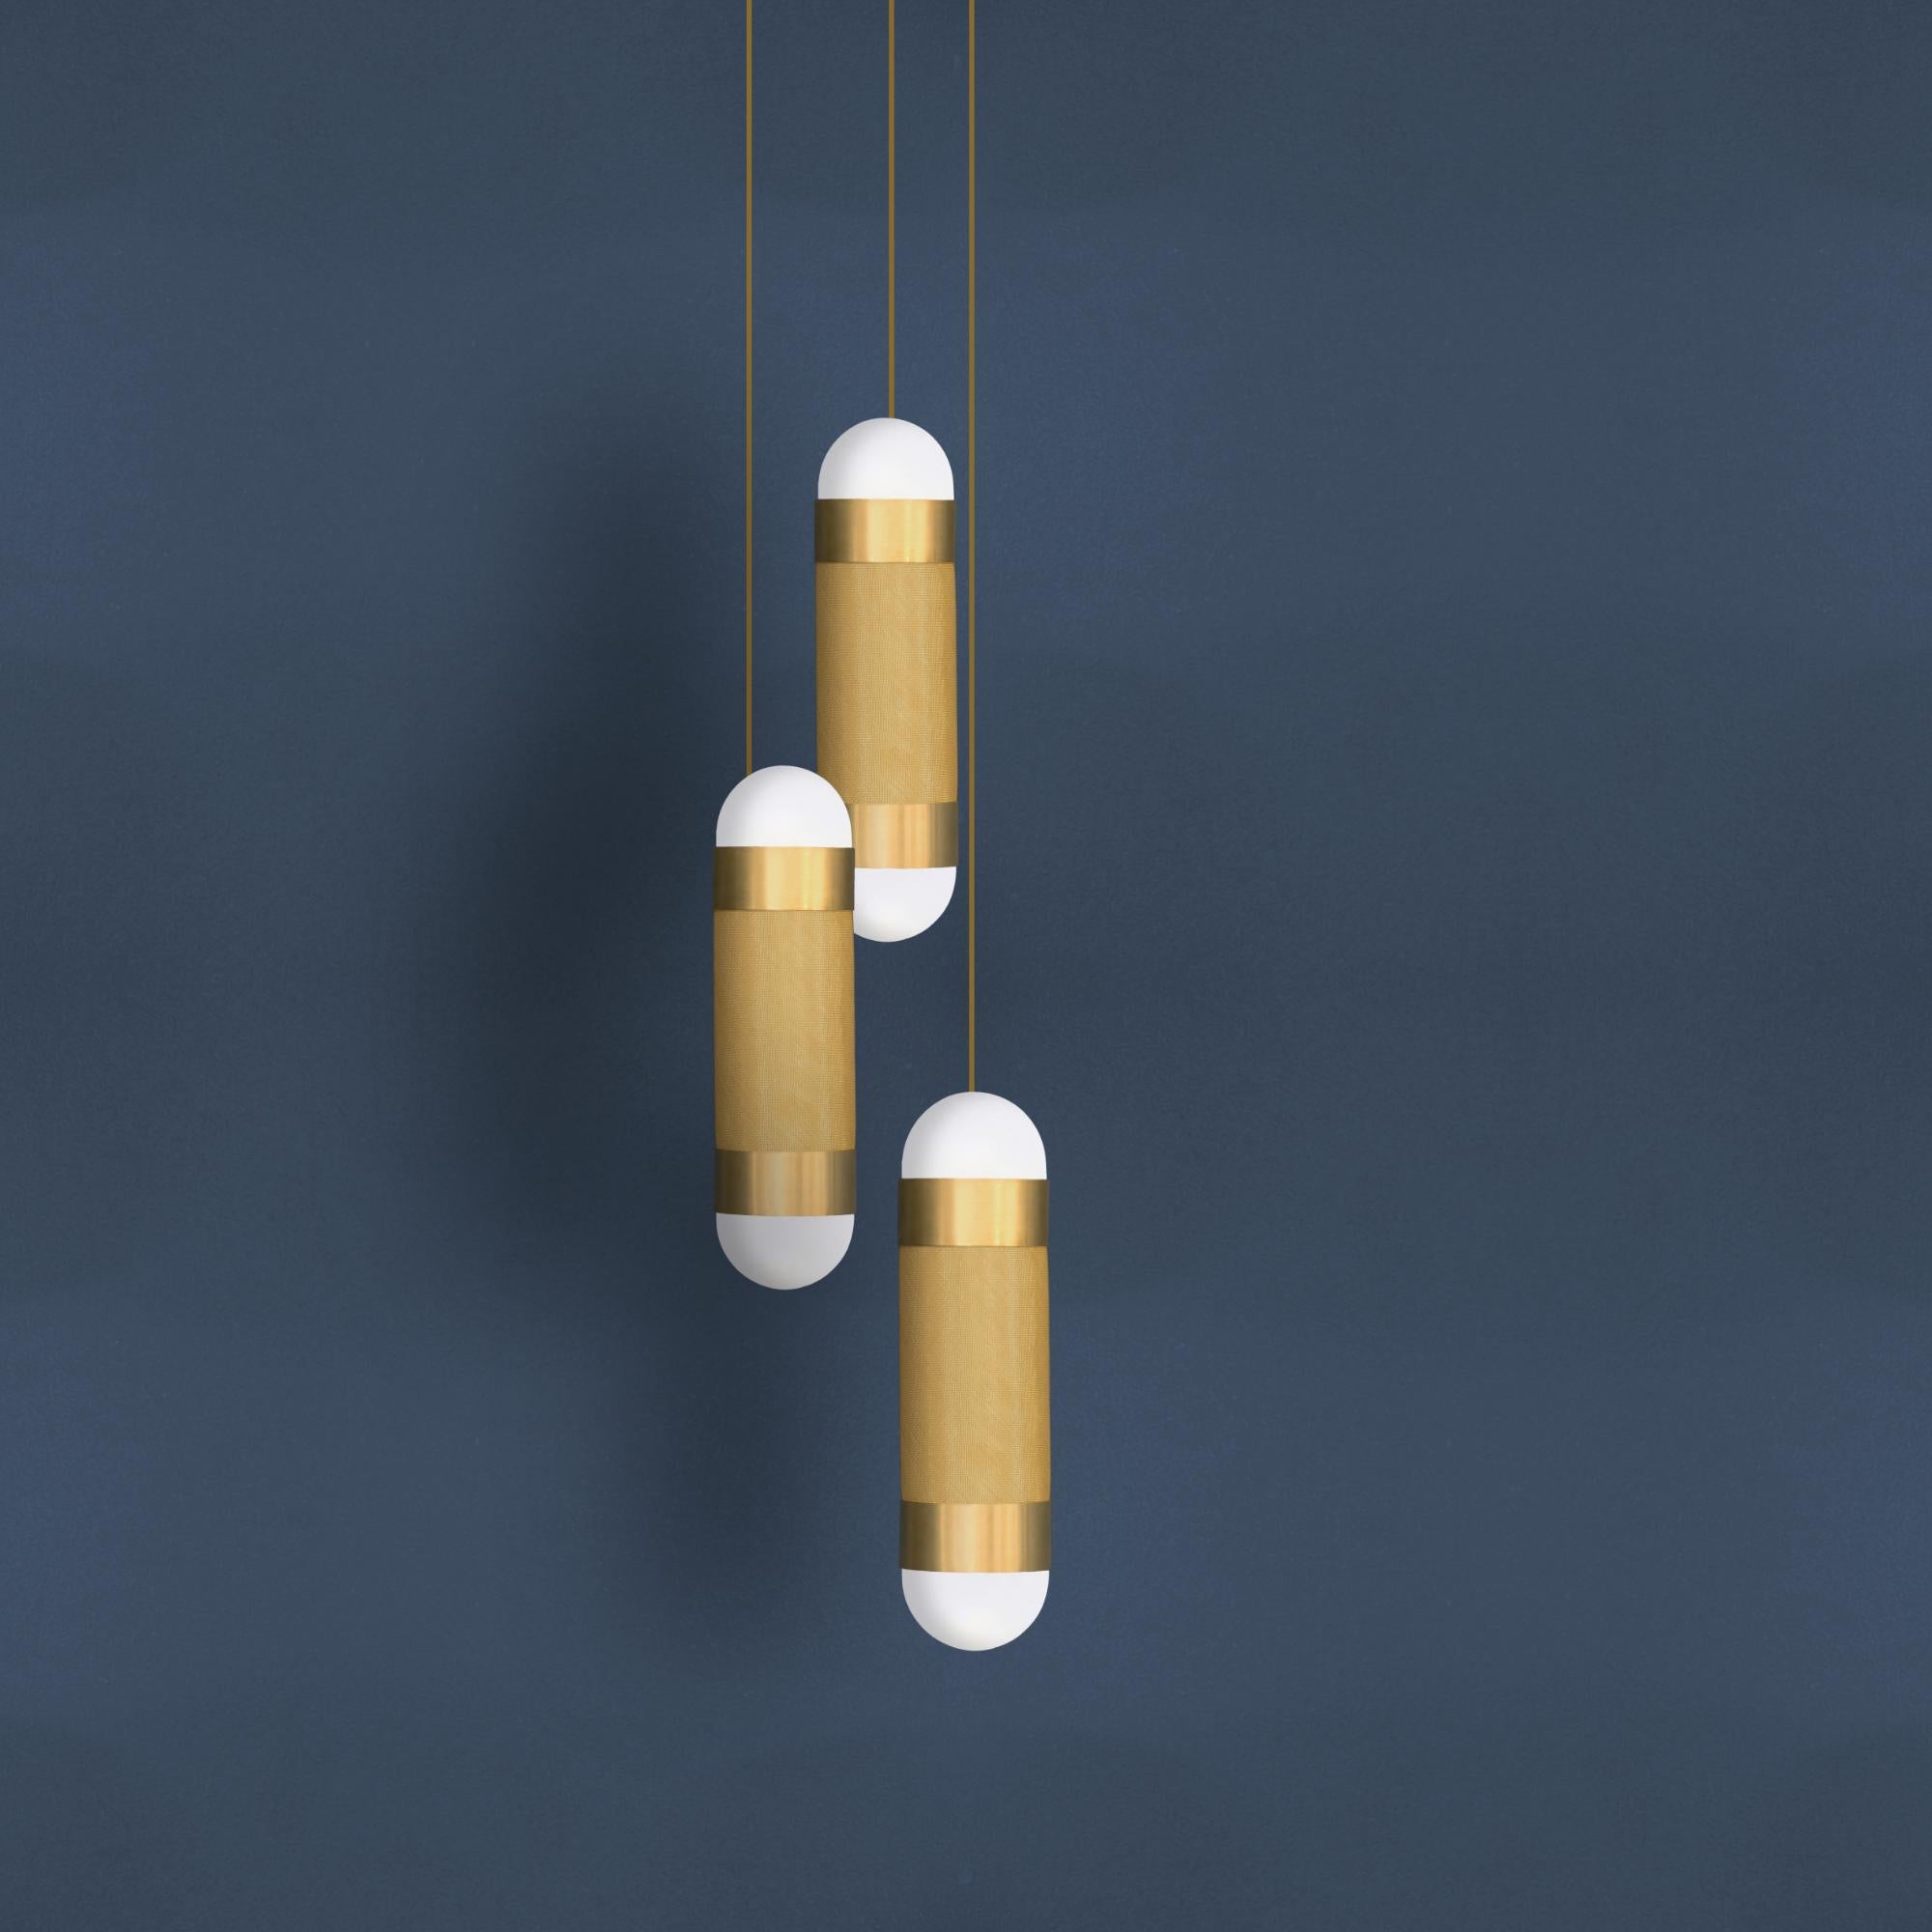 The LOOM cascade pendant light is defined by its signature woven brass cylinder topped with hand-brushed brass sleeves and completed with soft-white borosilicate glass domes. When illuminated the LOOM emanates a soft, warm glow through the brass